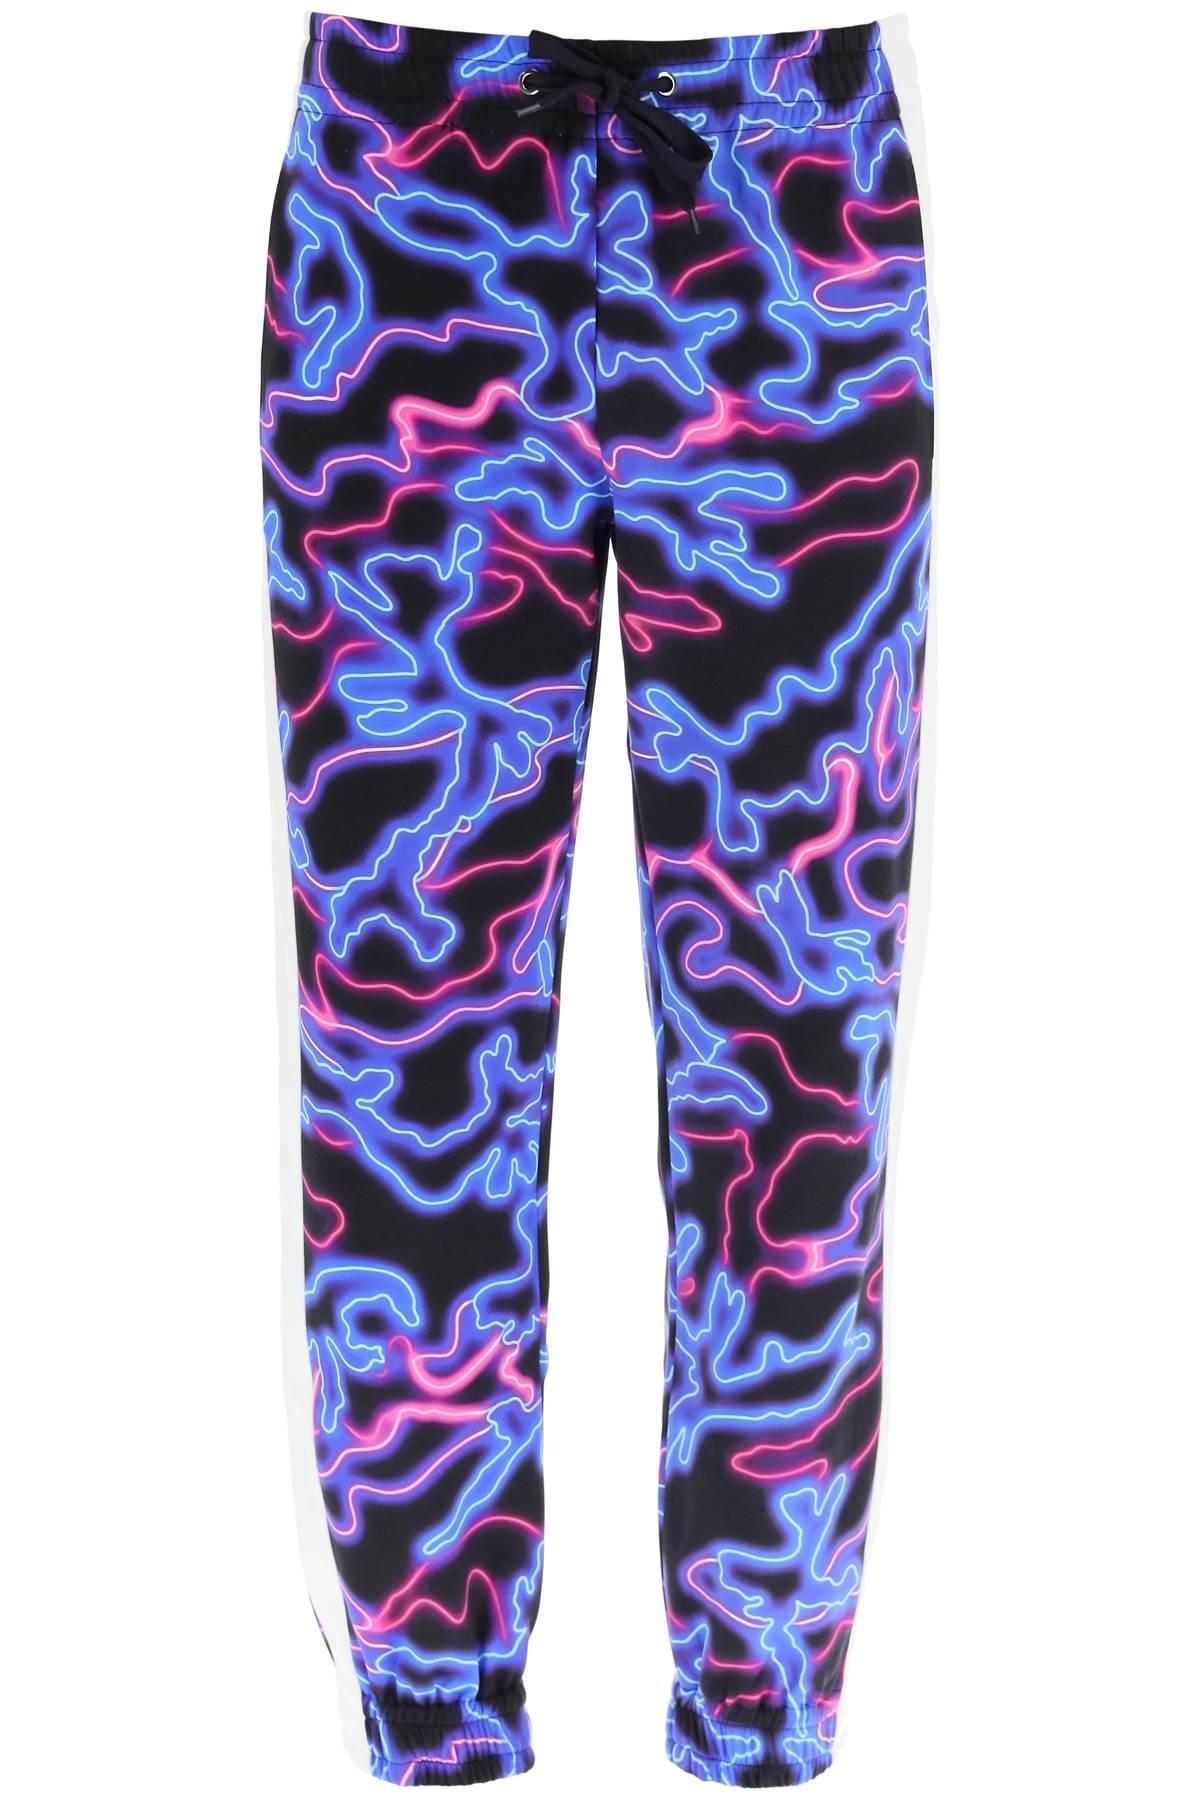 Valentino Cotton Camou Neon Trackpants in Blue for Men - Lyst